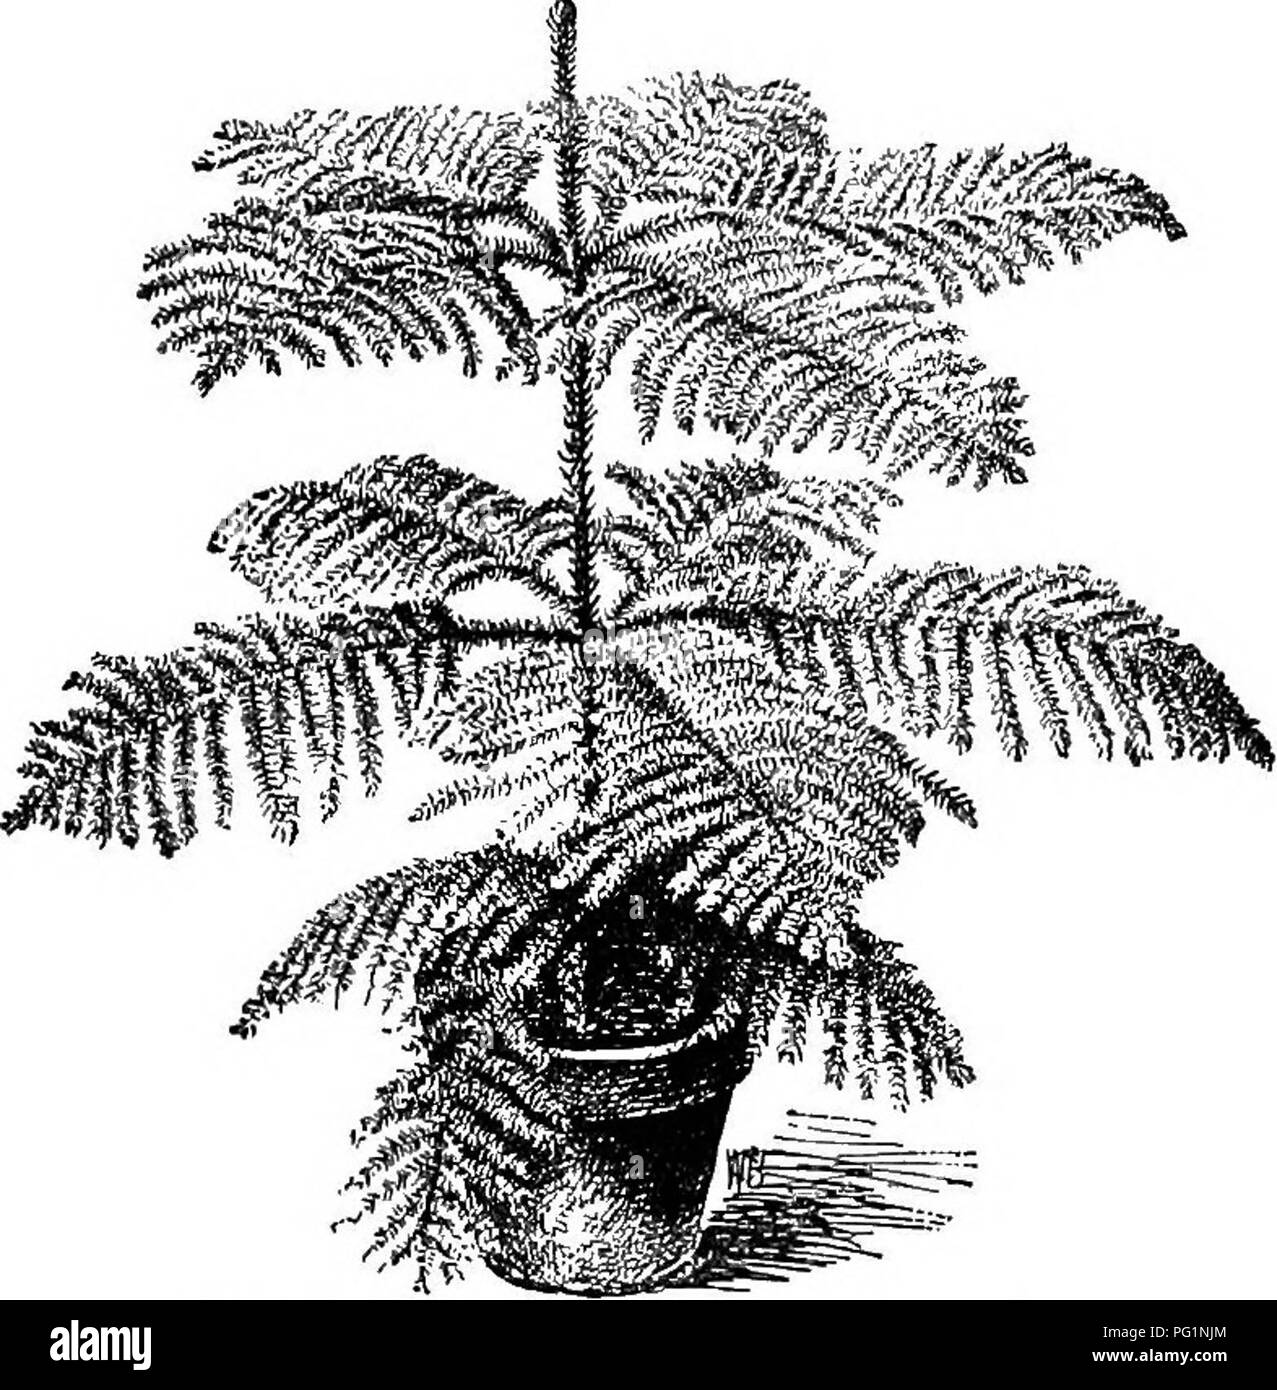 . Cyclopedia of American horticulture, comprising suggestions for cultivation of horticultural plants, descriptions of the species of fruits, vegetables, flowers, and ornamental plants sold in the United States and Canada, together with geographical and biographical sketches. Gardening. ABAUCARIA ARAUCARIA 89 Sfries, of which there are over 700 in that one city. The trade of the world has been supplied for many years from Ghent. Some of the large English growers have. 130, Good specimen of Araucaria excelsa. begun to grow them in considerable quantities in the past five years, but it is likely Stock Photo